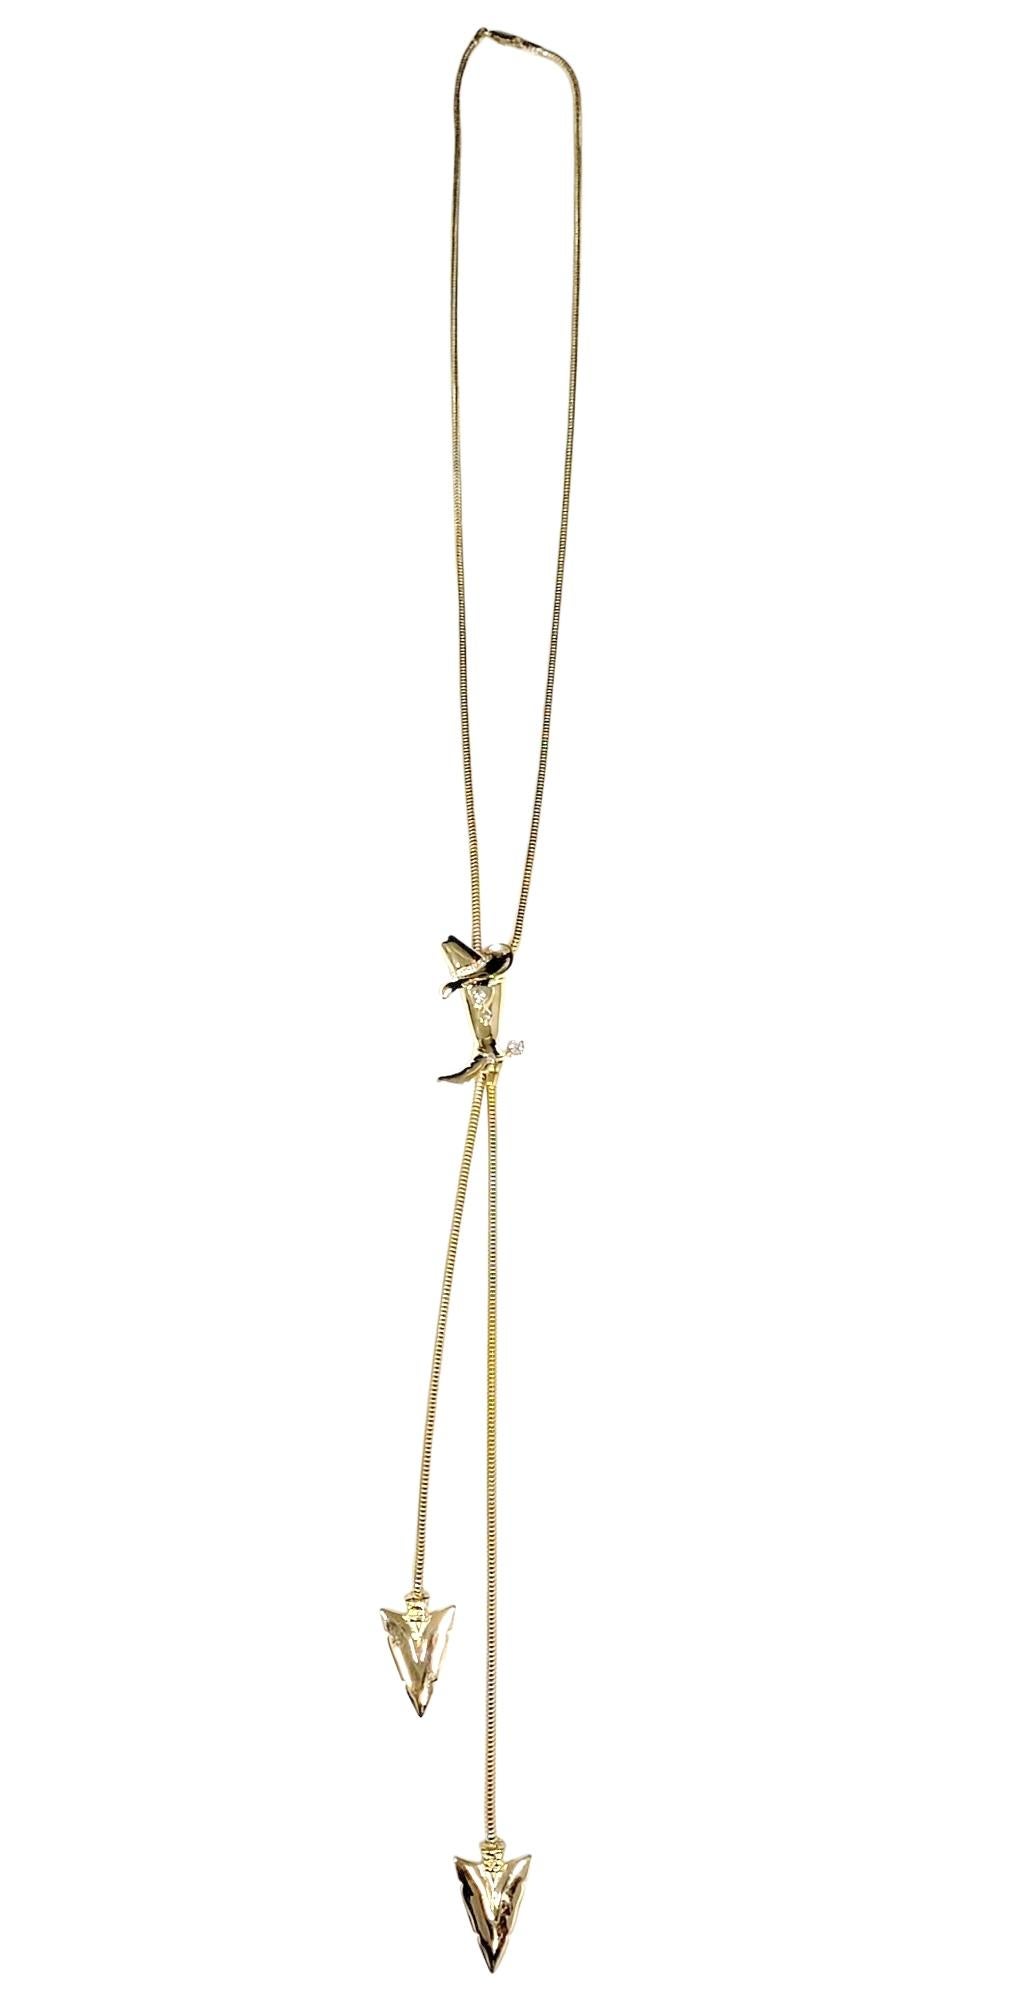 Equestrian Boot, Hat and Arrowhead 14K Yellow Gold Lariat Necklace with Diamonds In Good Condition For Sale In Scottsdale, AZ